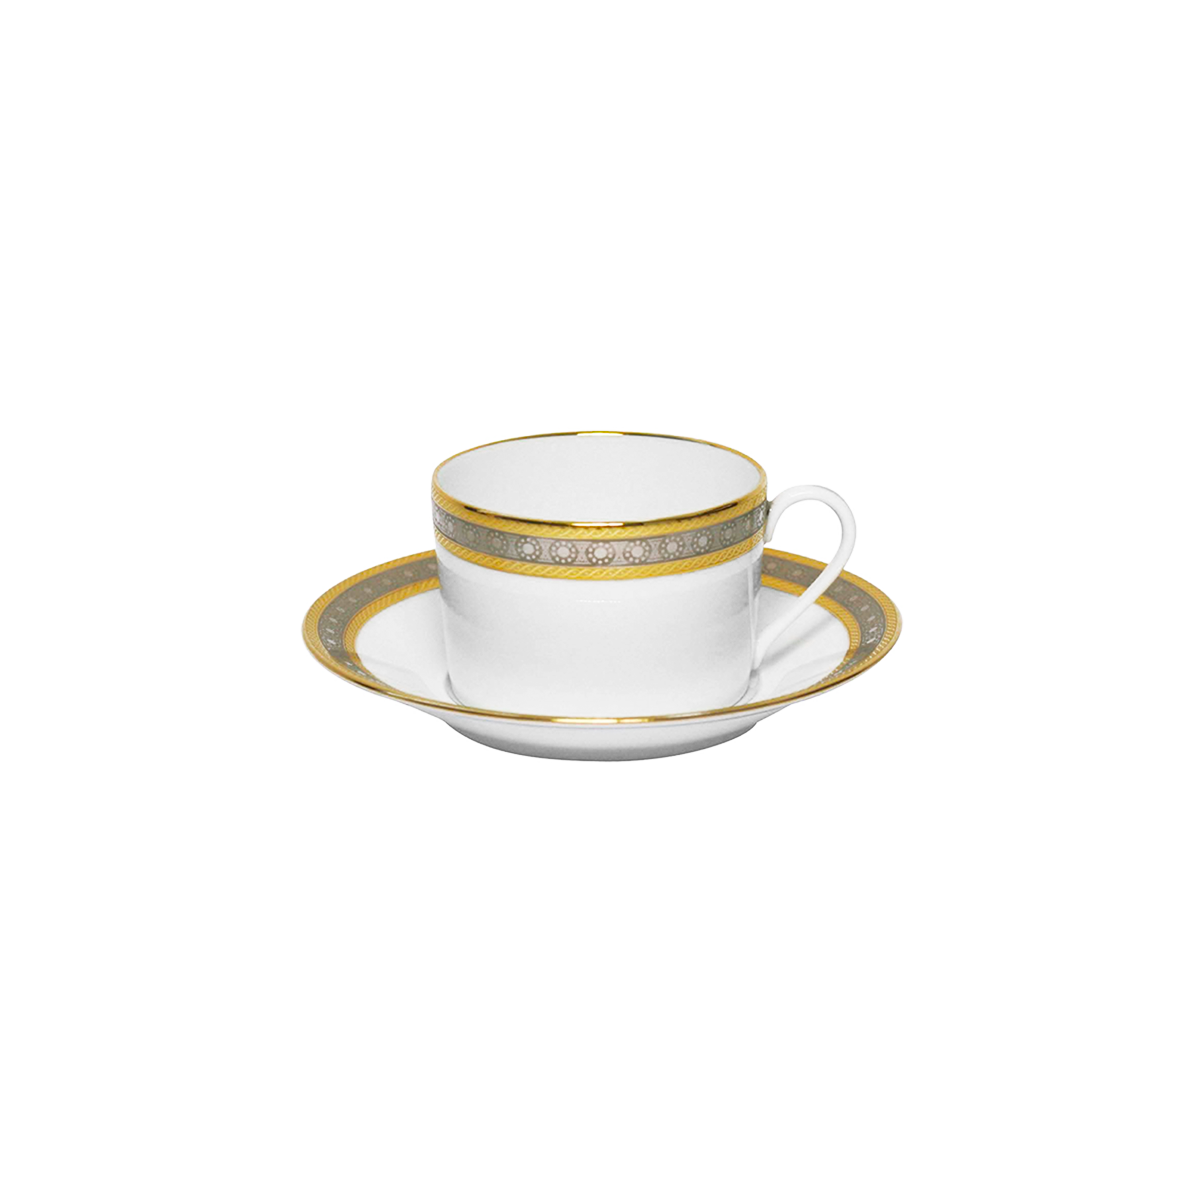 Place Vendome Teacup And Saucer